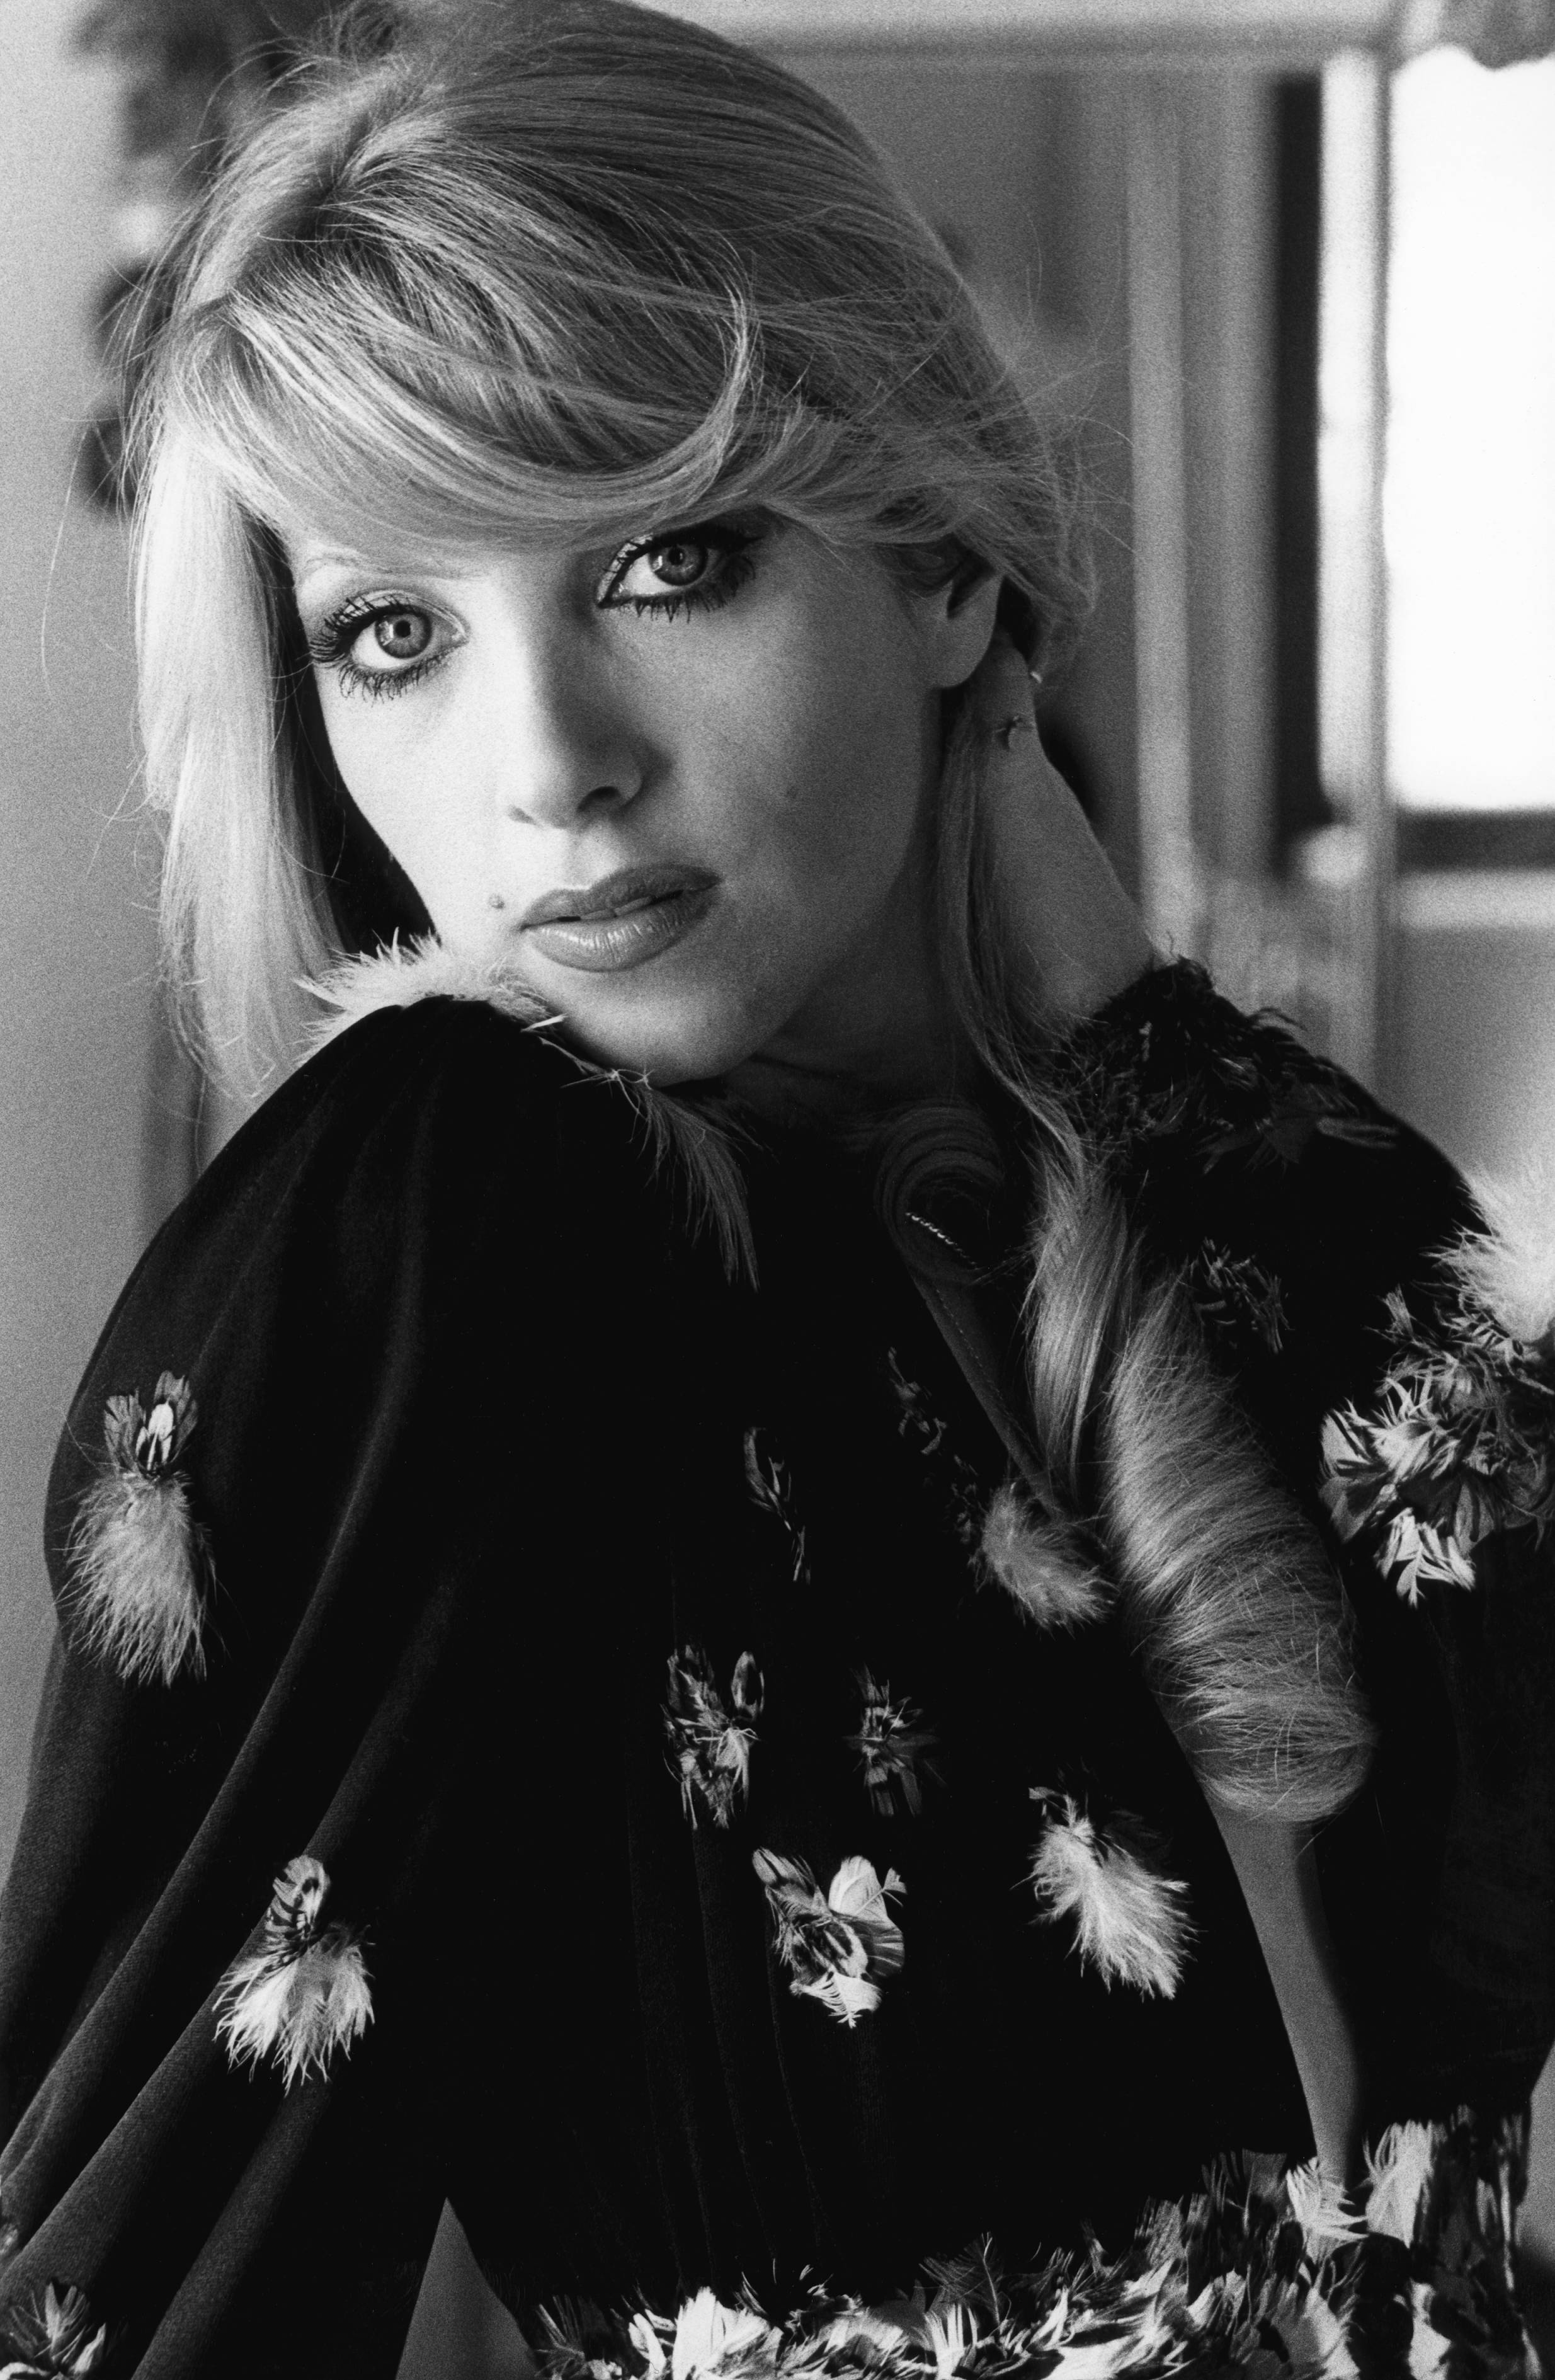 A portrait of English native Lynsey De Paul who had an affair with Sean Connery in the '80s. / Source: Getty Images